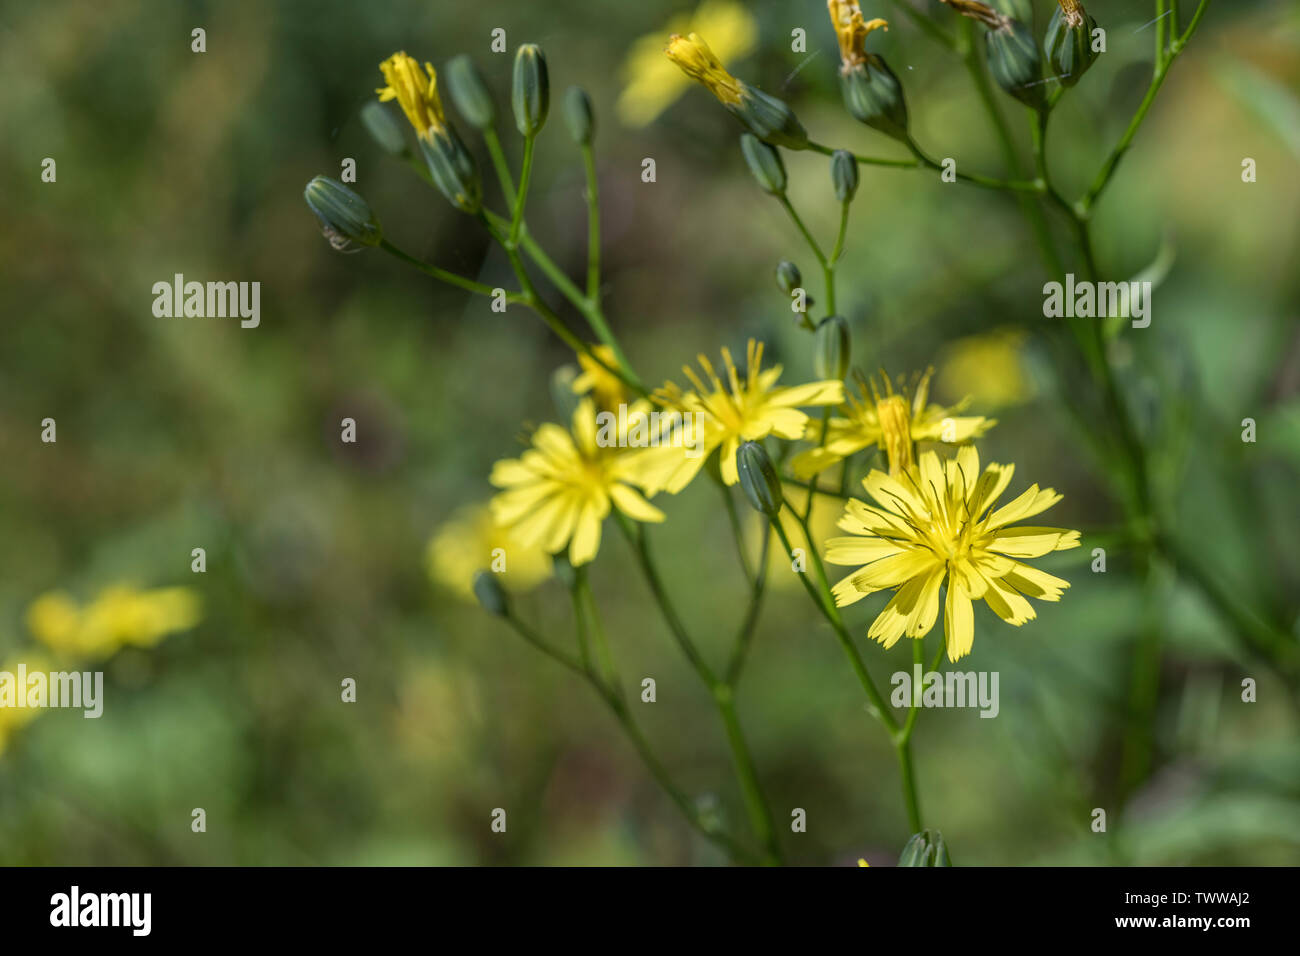 Possibly yellow flowers of Nipplewort / Lapsana communis, but unsure. Certainly a Daisy. Young nipplewort leaves may be eaten cooked as survival food Stock Photo